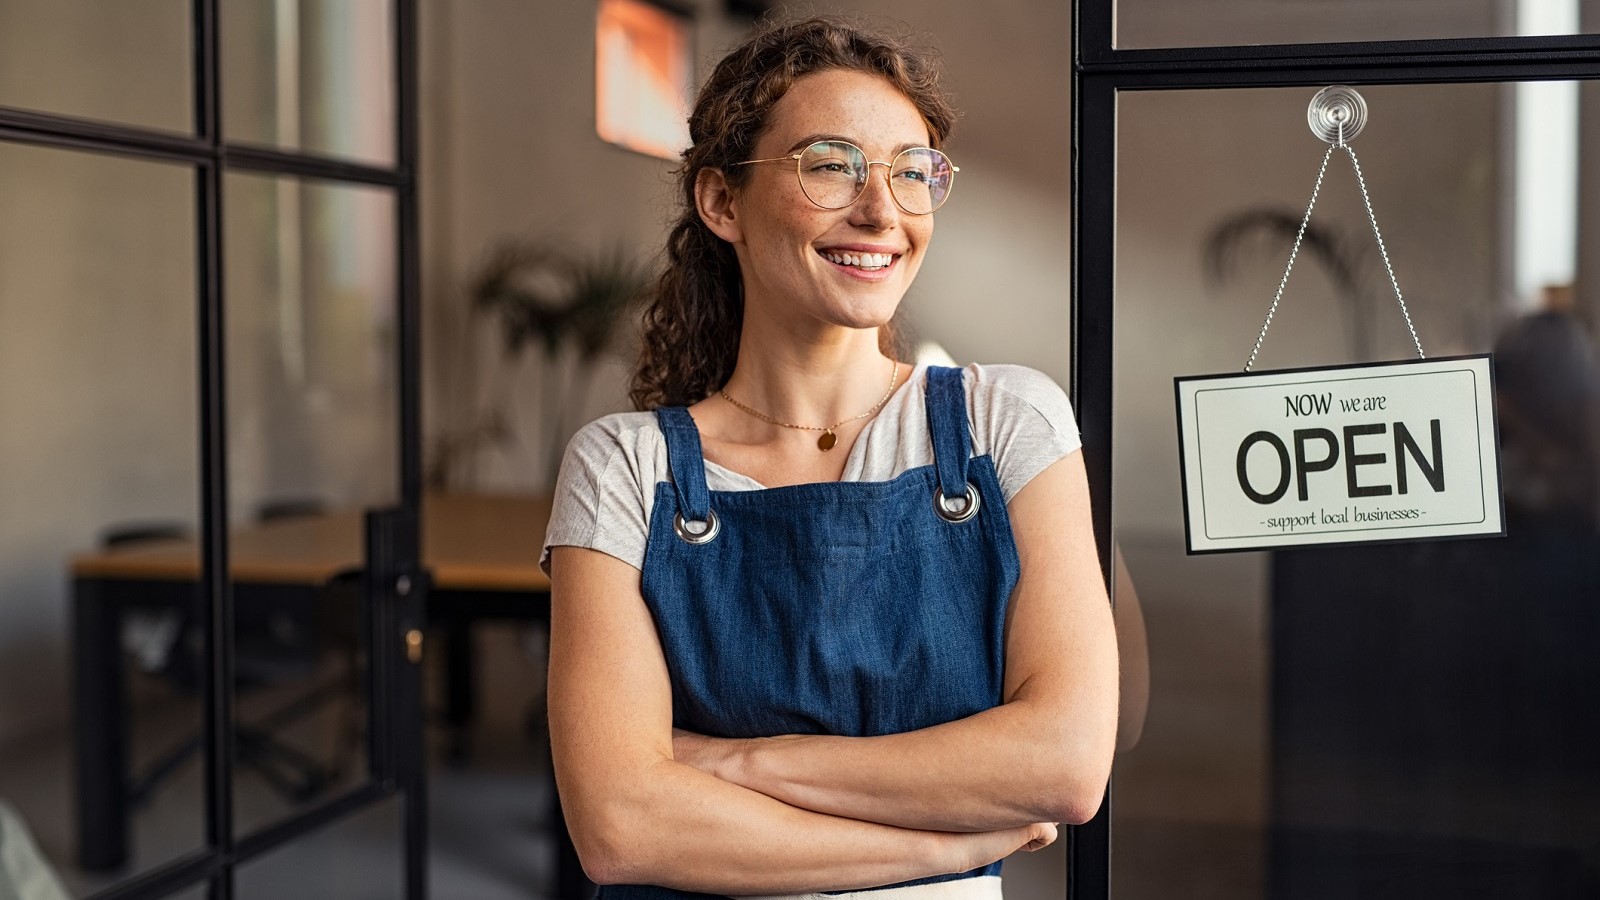 Small business owner smiling at their store